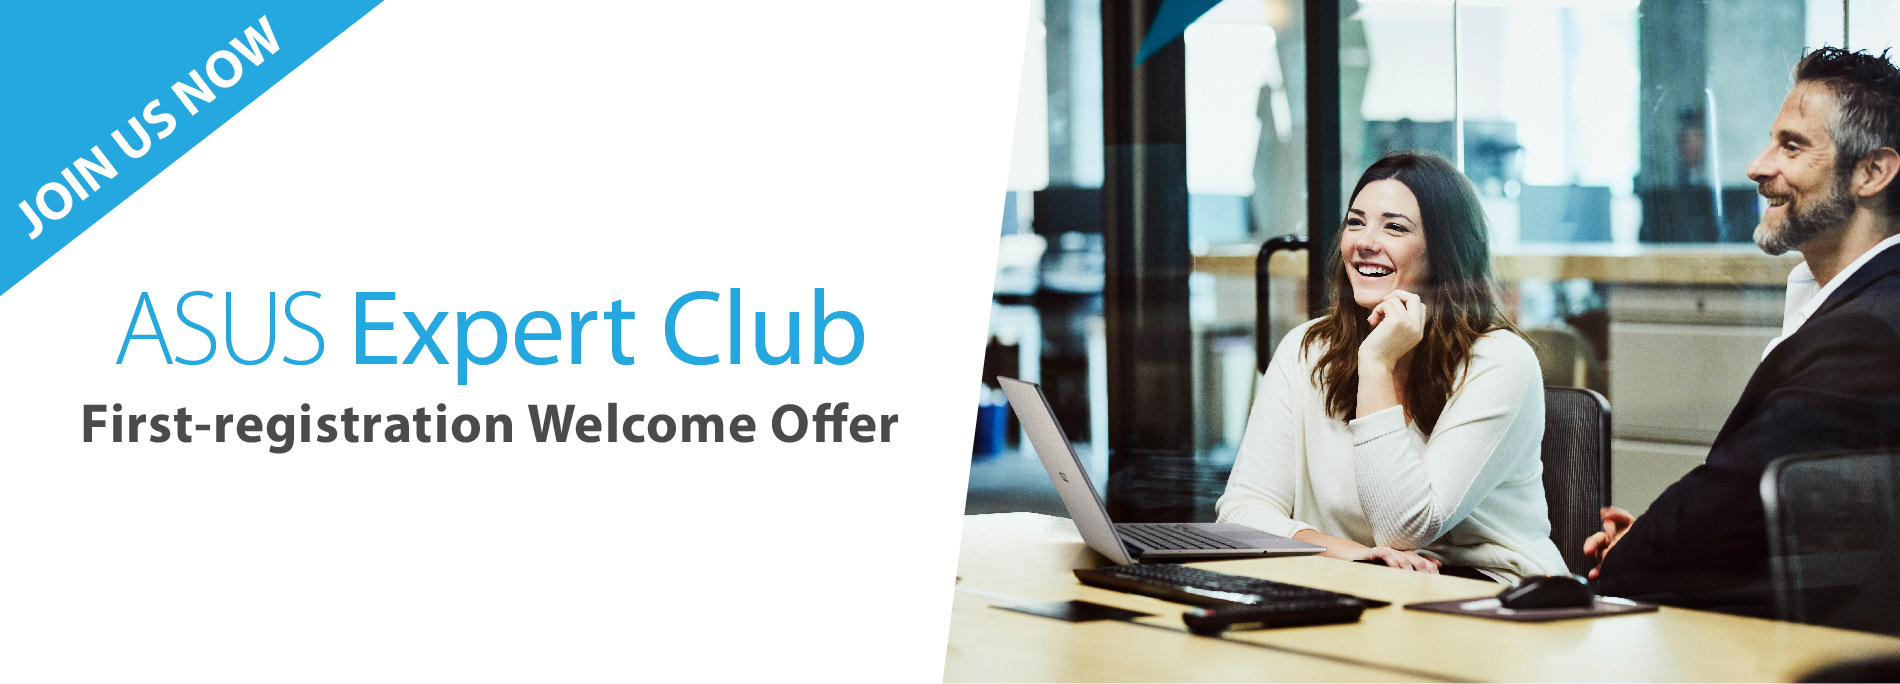 ASUS Expert Club First-registration welcome offer